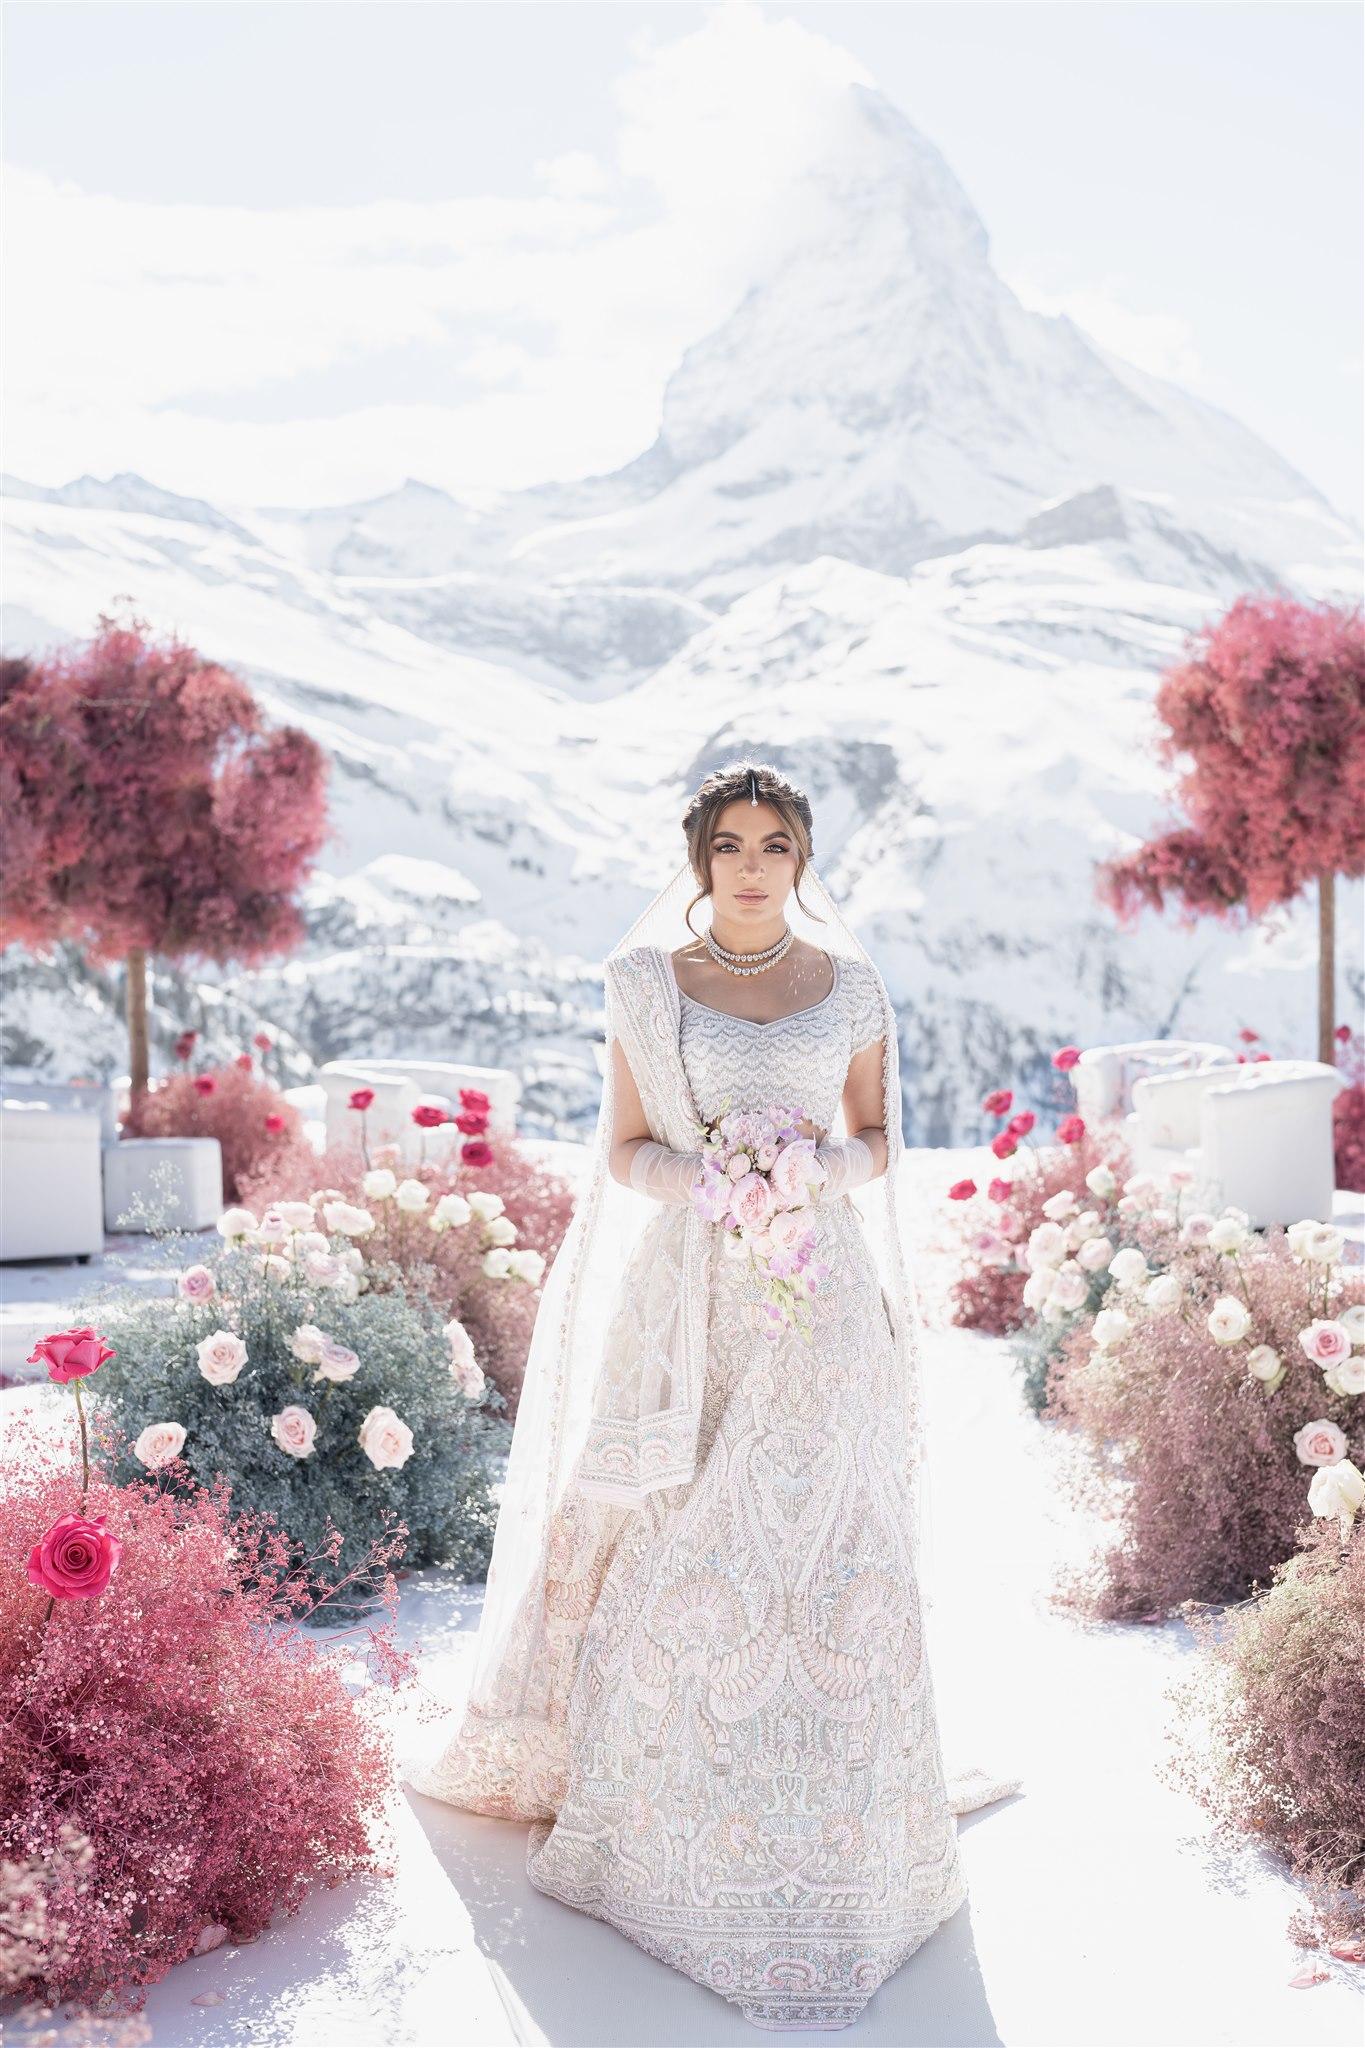 Sonam in her modern-cultural wedding dress walking down the aisle while holding a flower bouquet | Wedifys